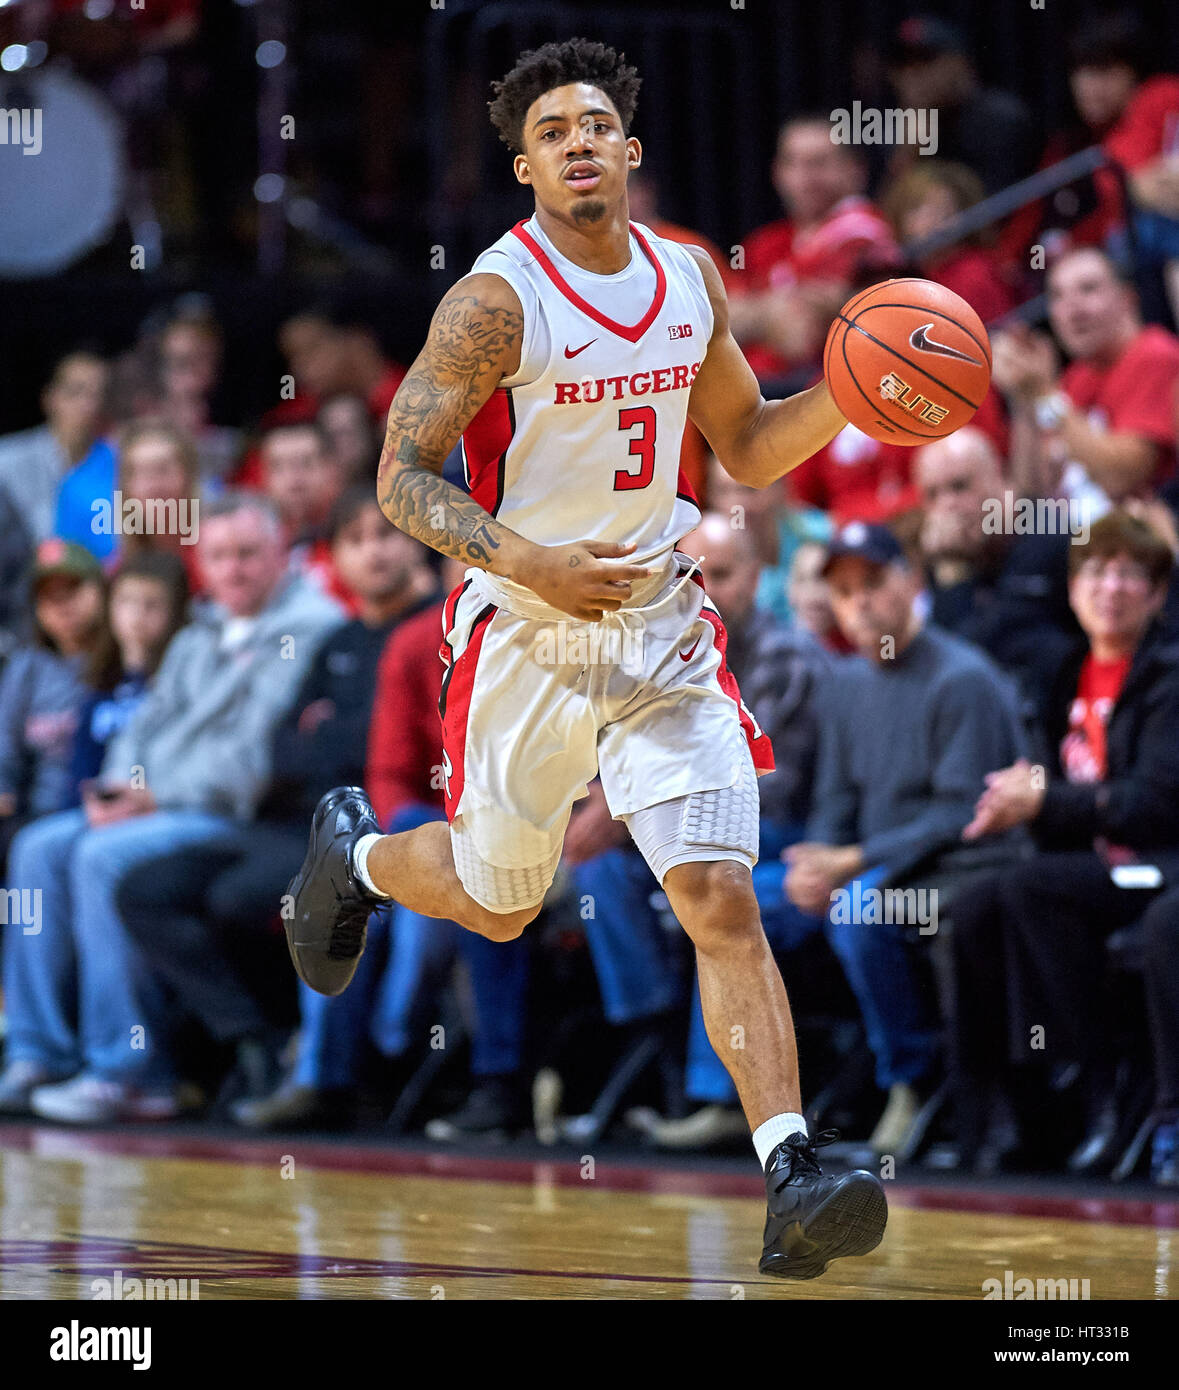 Rutgers' guard Corey Sanders (3) brings the ball up court in the Stock ...